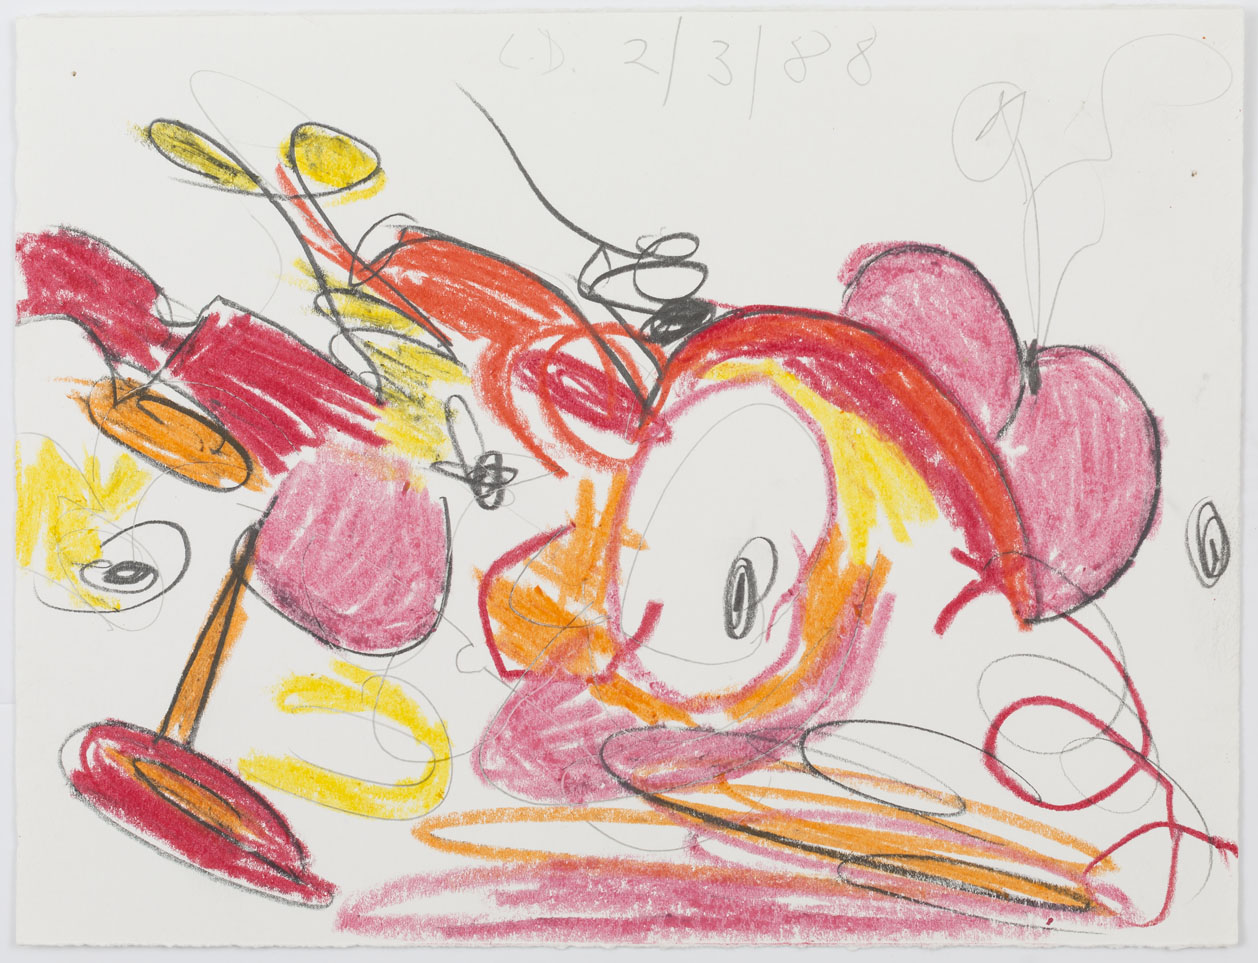 <i>Untitled (2/3/88)</i>, 1988, wax crayon and pencil on paper,7 5/8 x 10  inches (19.4 x 25.4 cm)